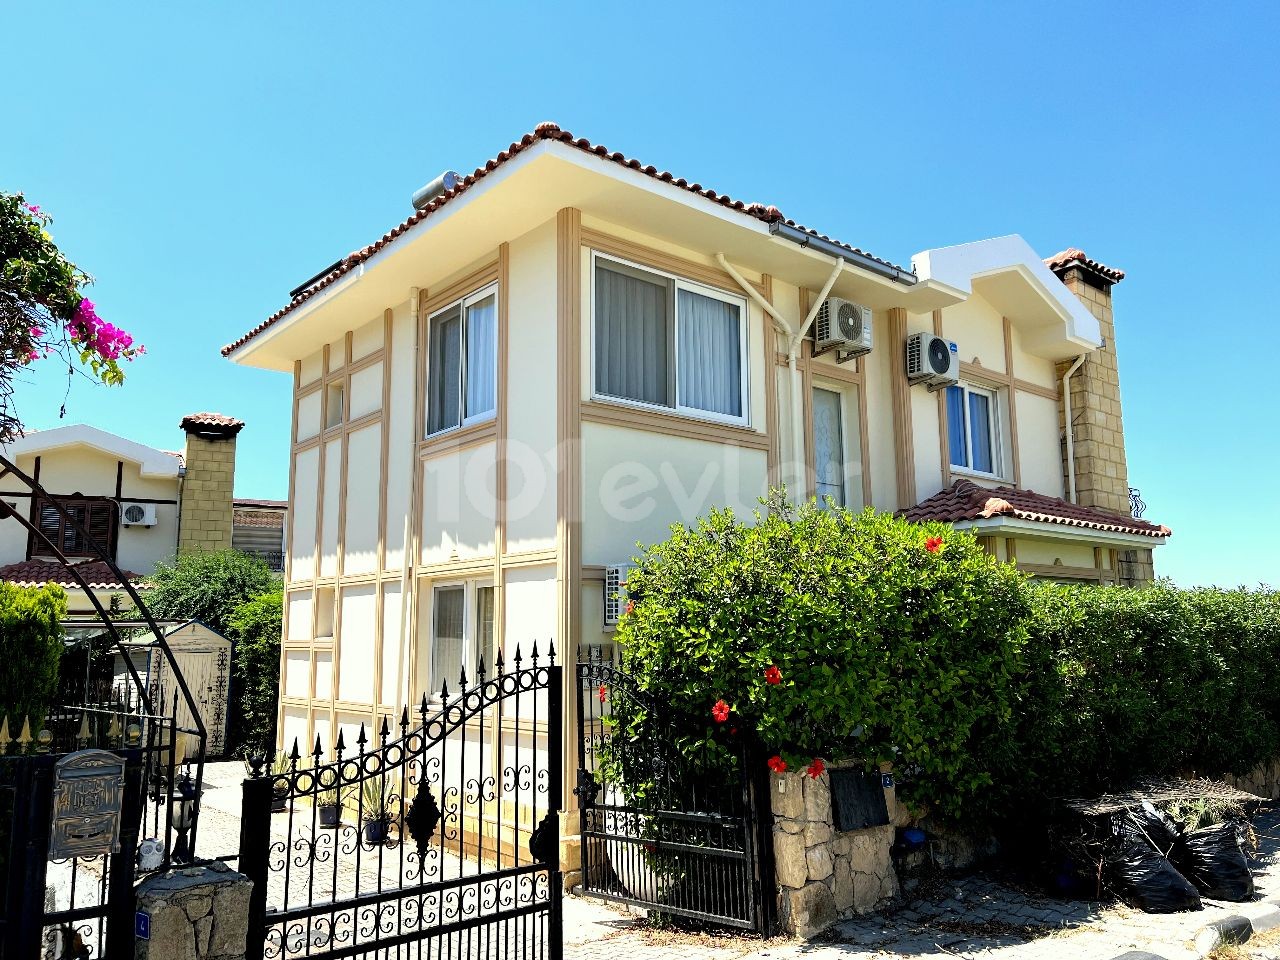 4 bedroom villa in Alsancak, fully furnished, private swimming pool,ready title deed. no VAT. 05338403555